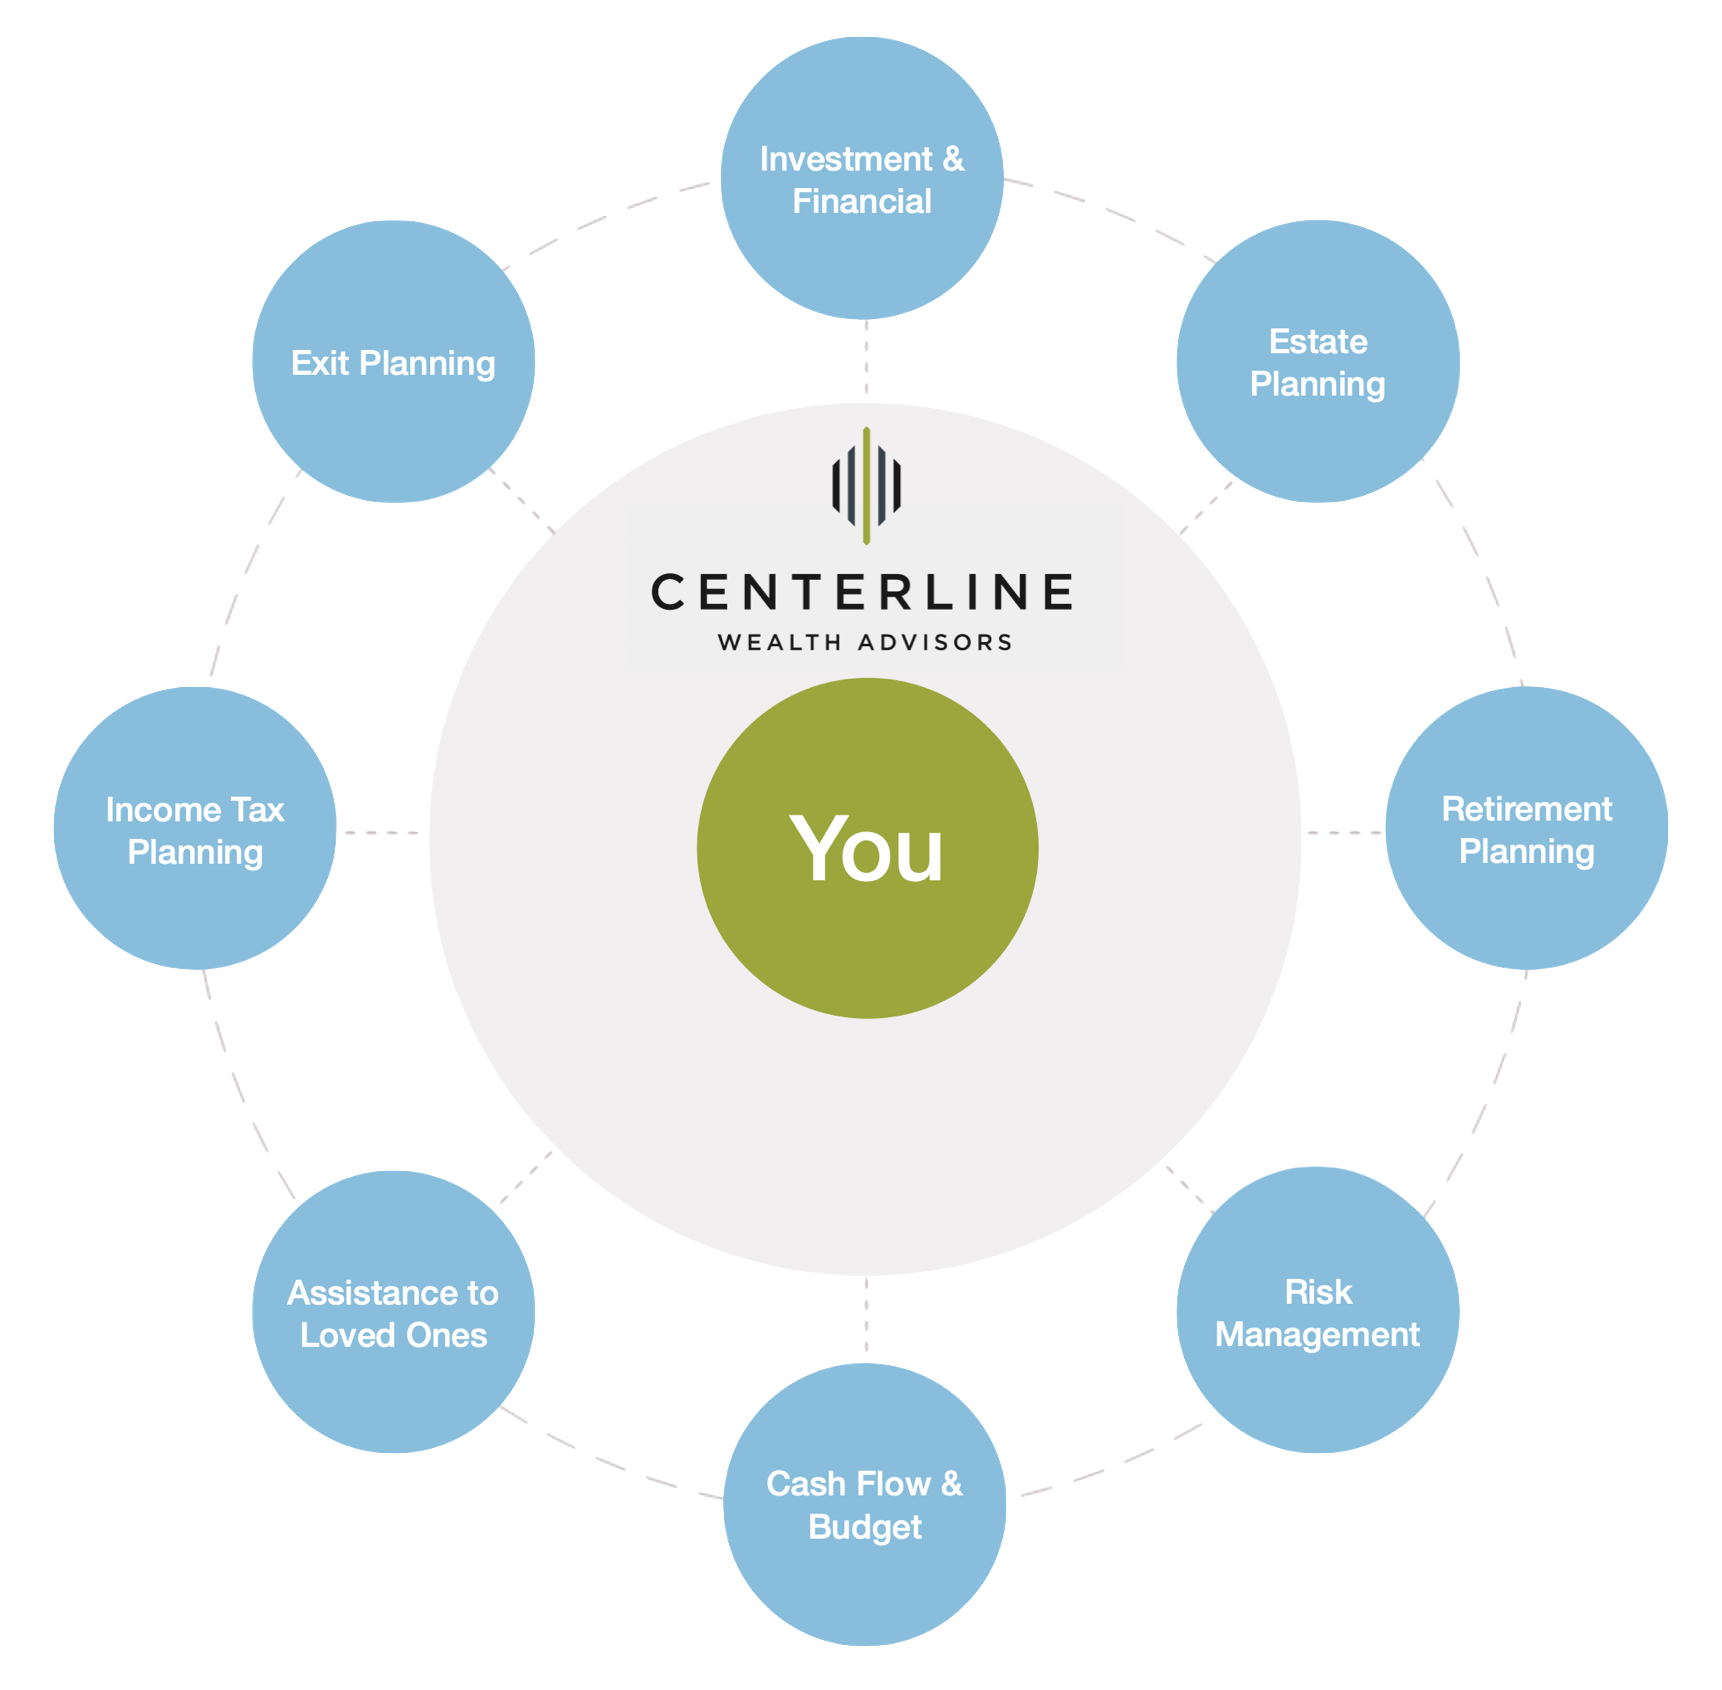 Centerline's core services include investment and financial, estate planning, retirement planning, risk management, cash flow and budget, assistance to loved ones, income tax planning, and exit planning.